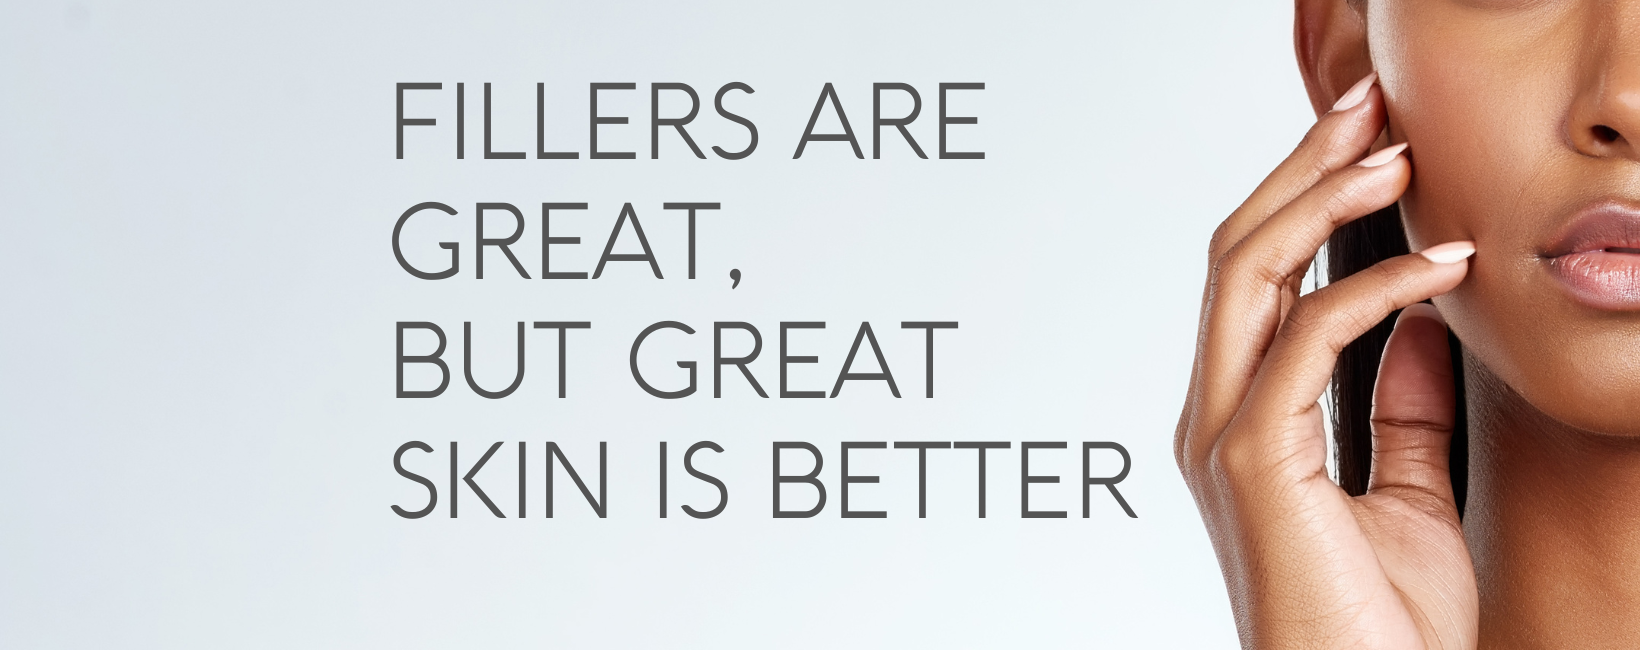 Fillers Are Great, But Great Skin is Better